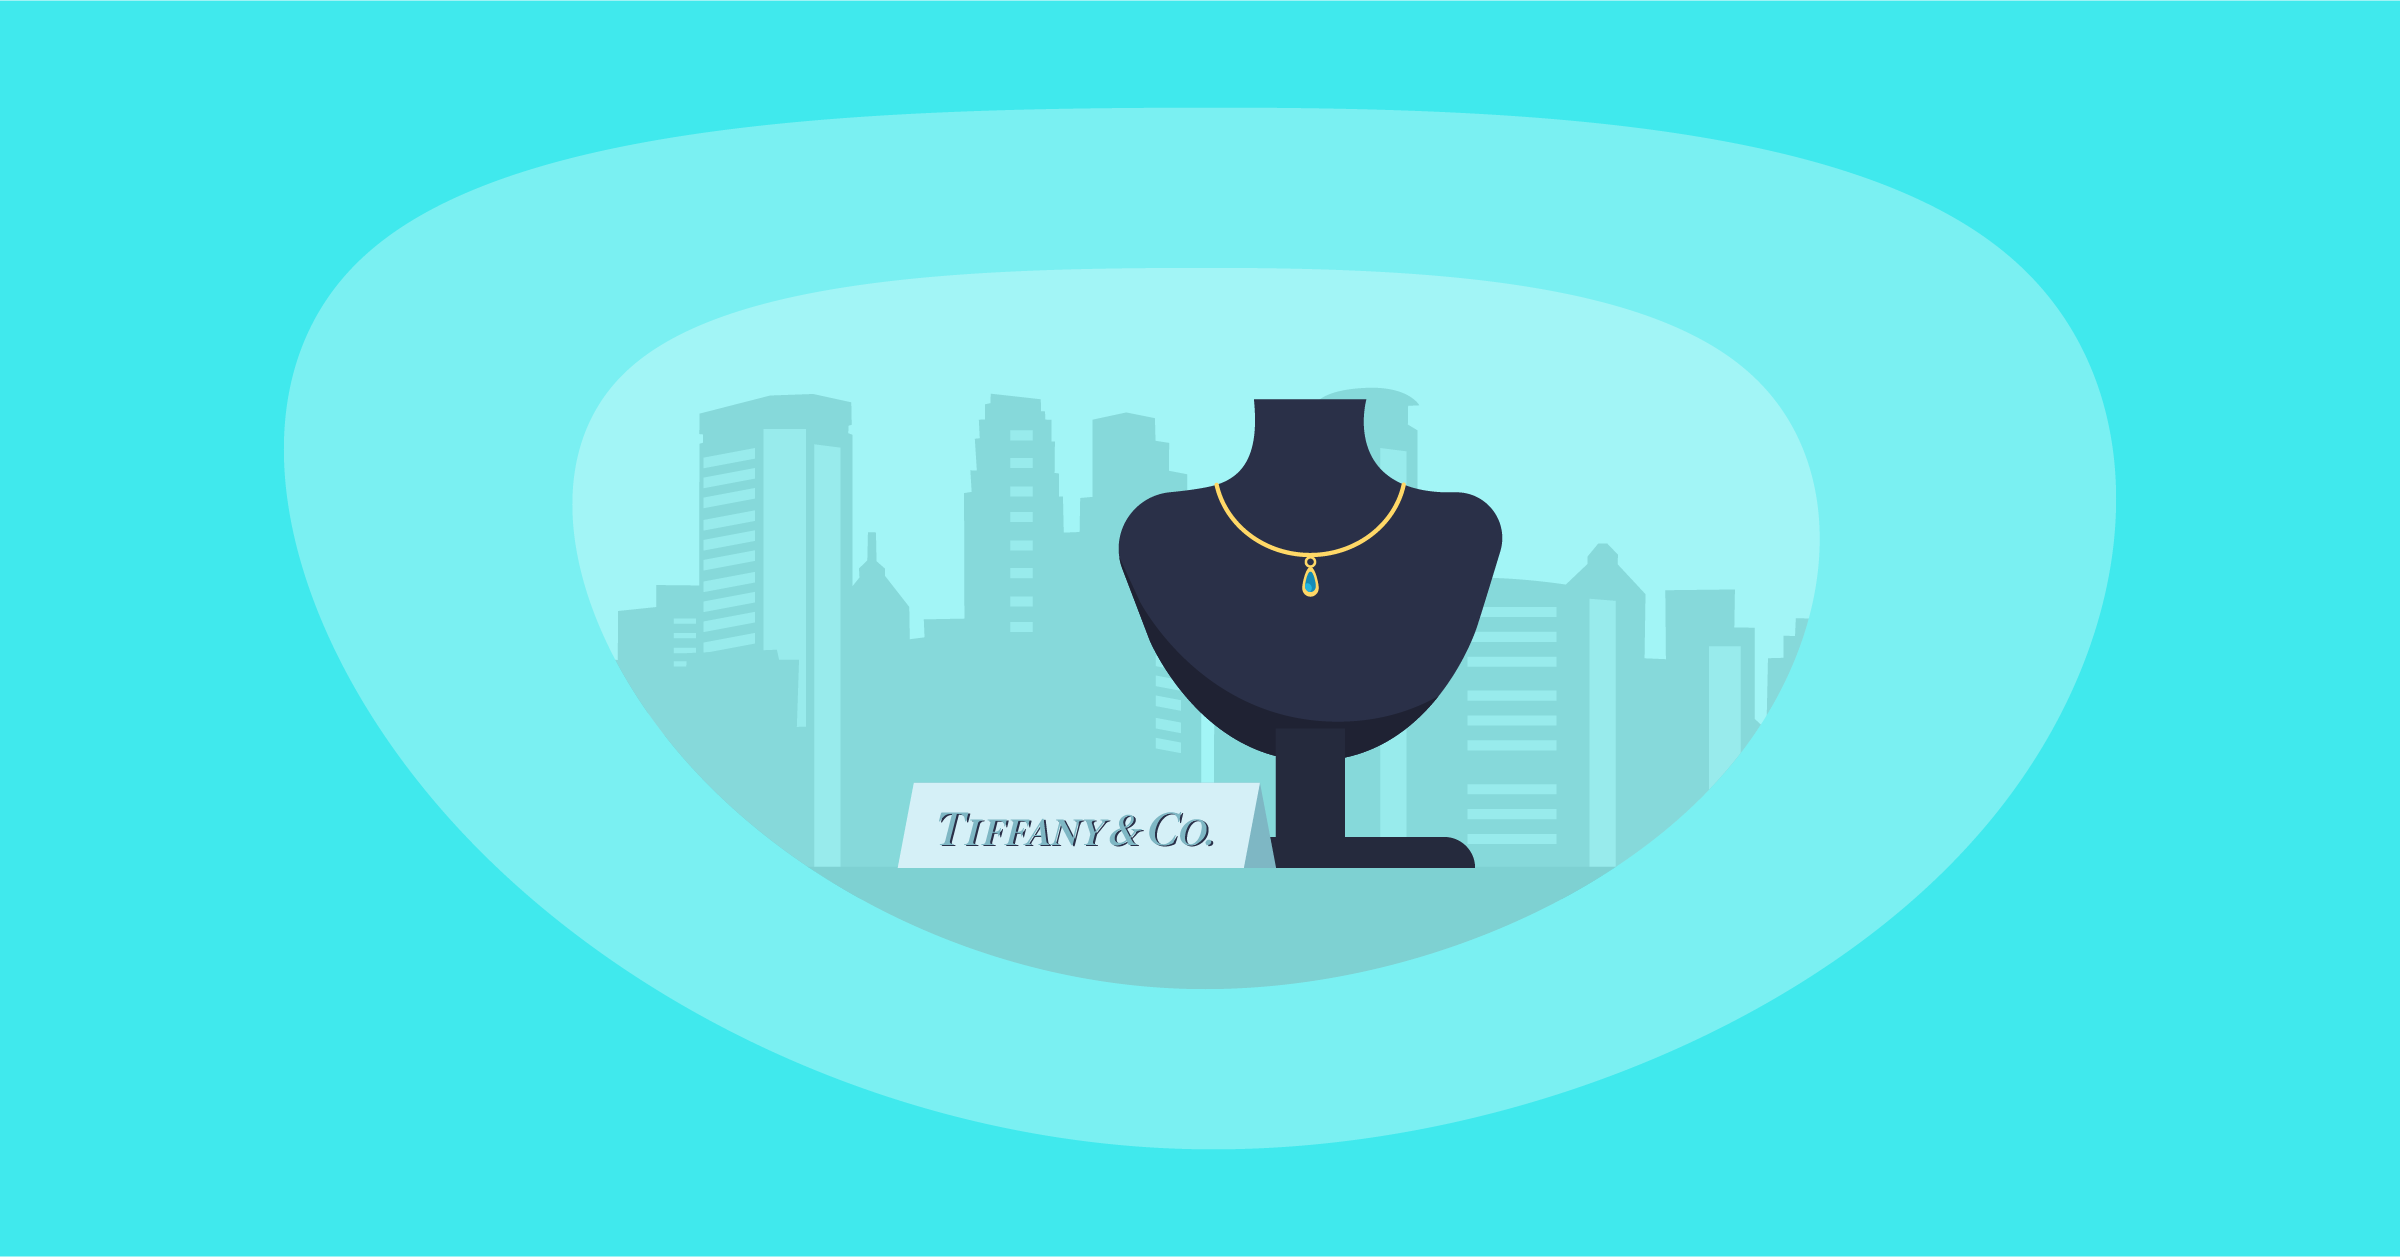 Illustration of a Tiffany & Co necklace